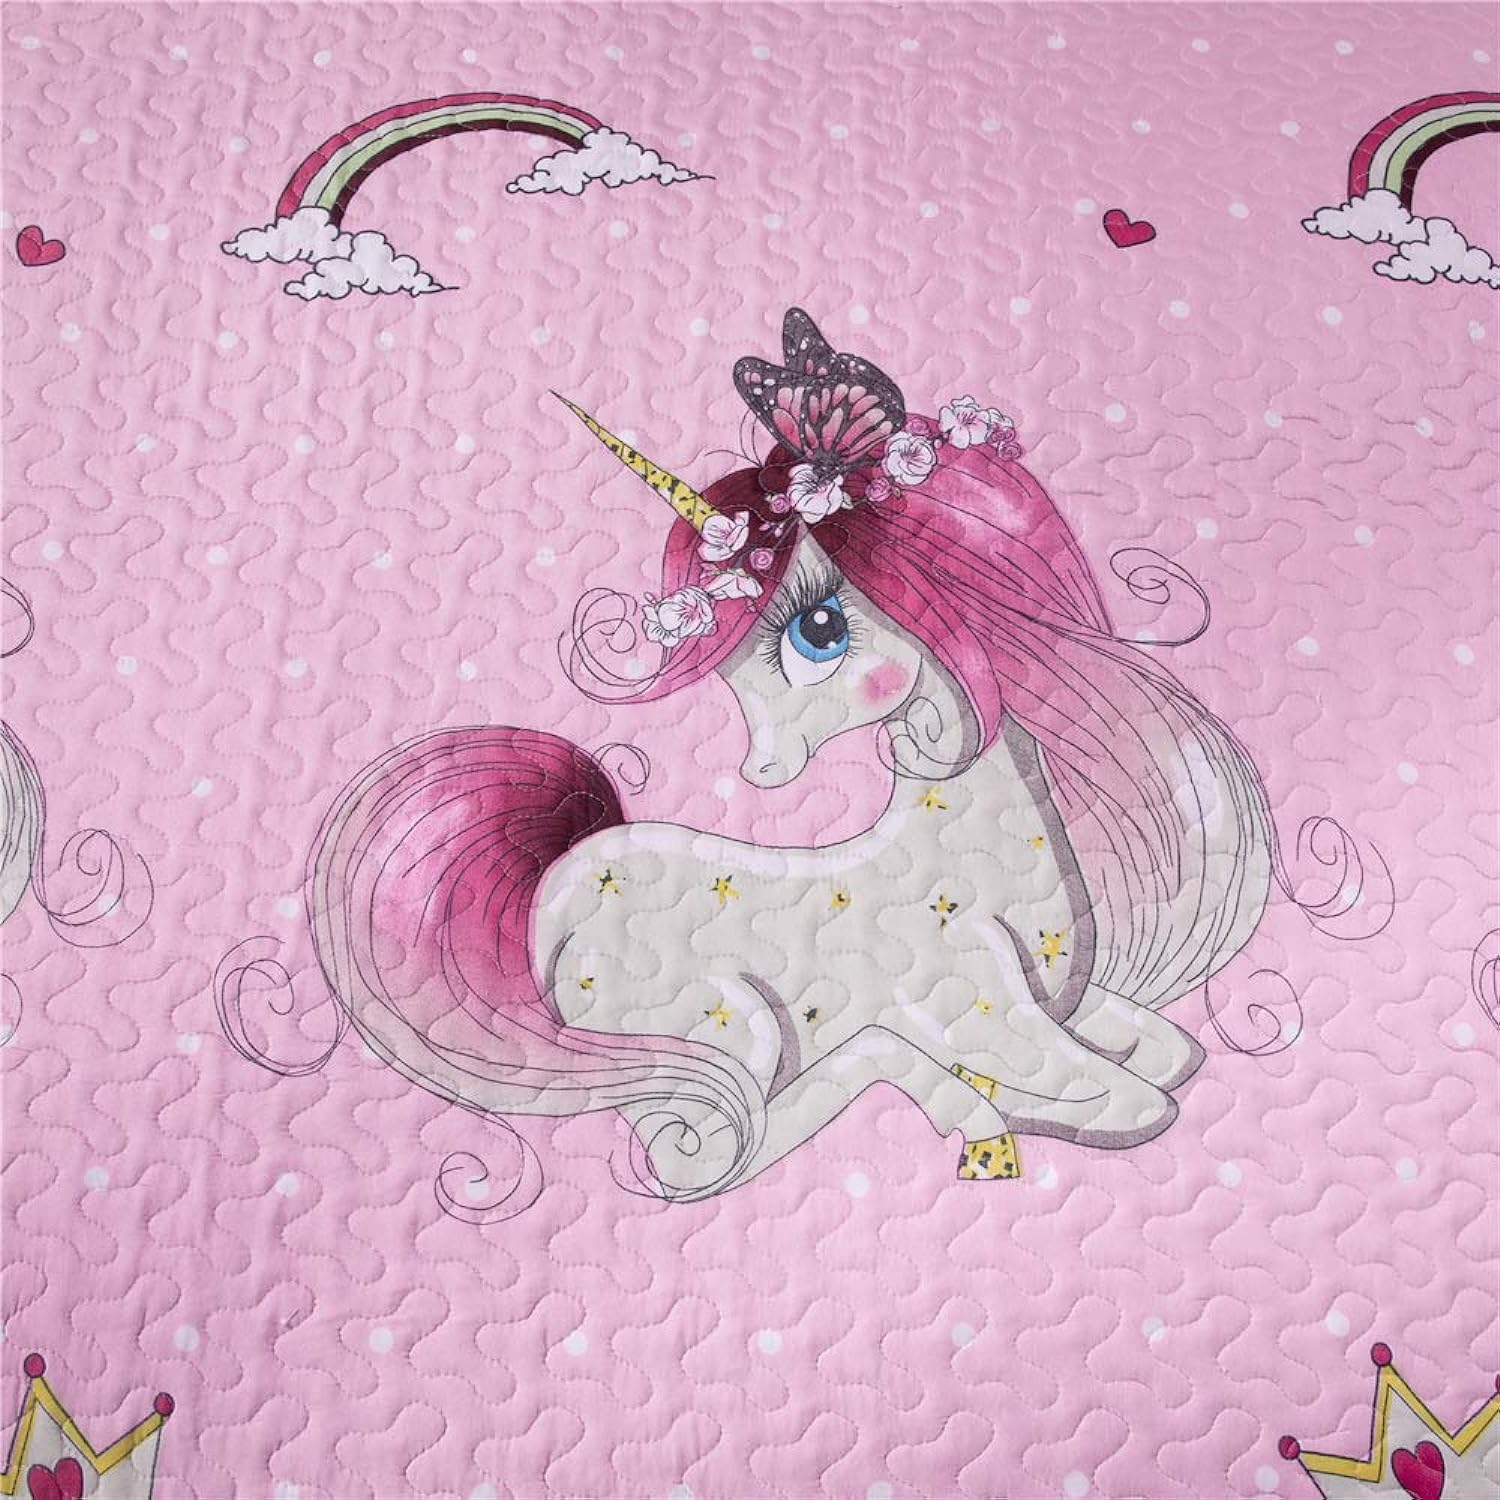 Great Choice Products Quilt Set Queen Size Girls Quilt Bedding Queen Quilt Girls Kids Quilt Bedspreads Coverlet Pink Unicorn Bedding Girls Lightwei…